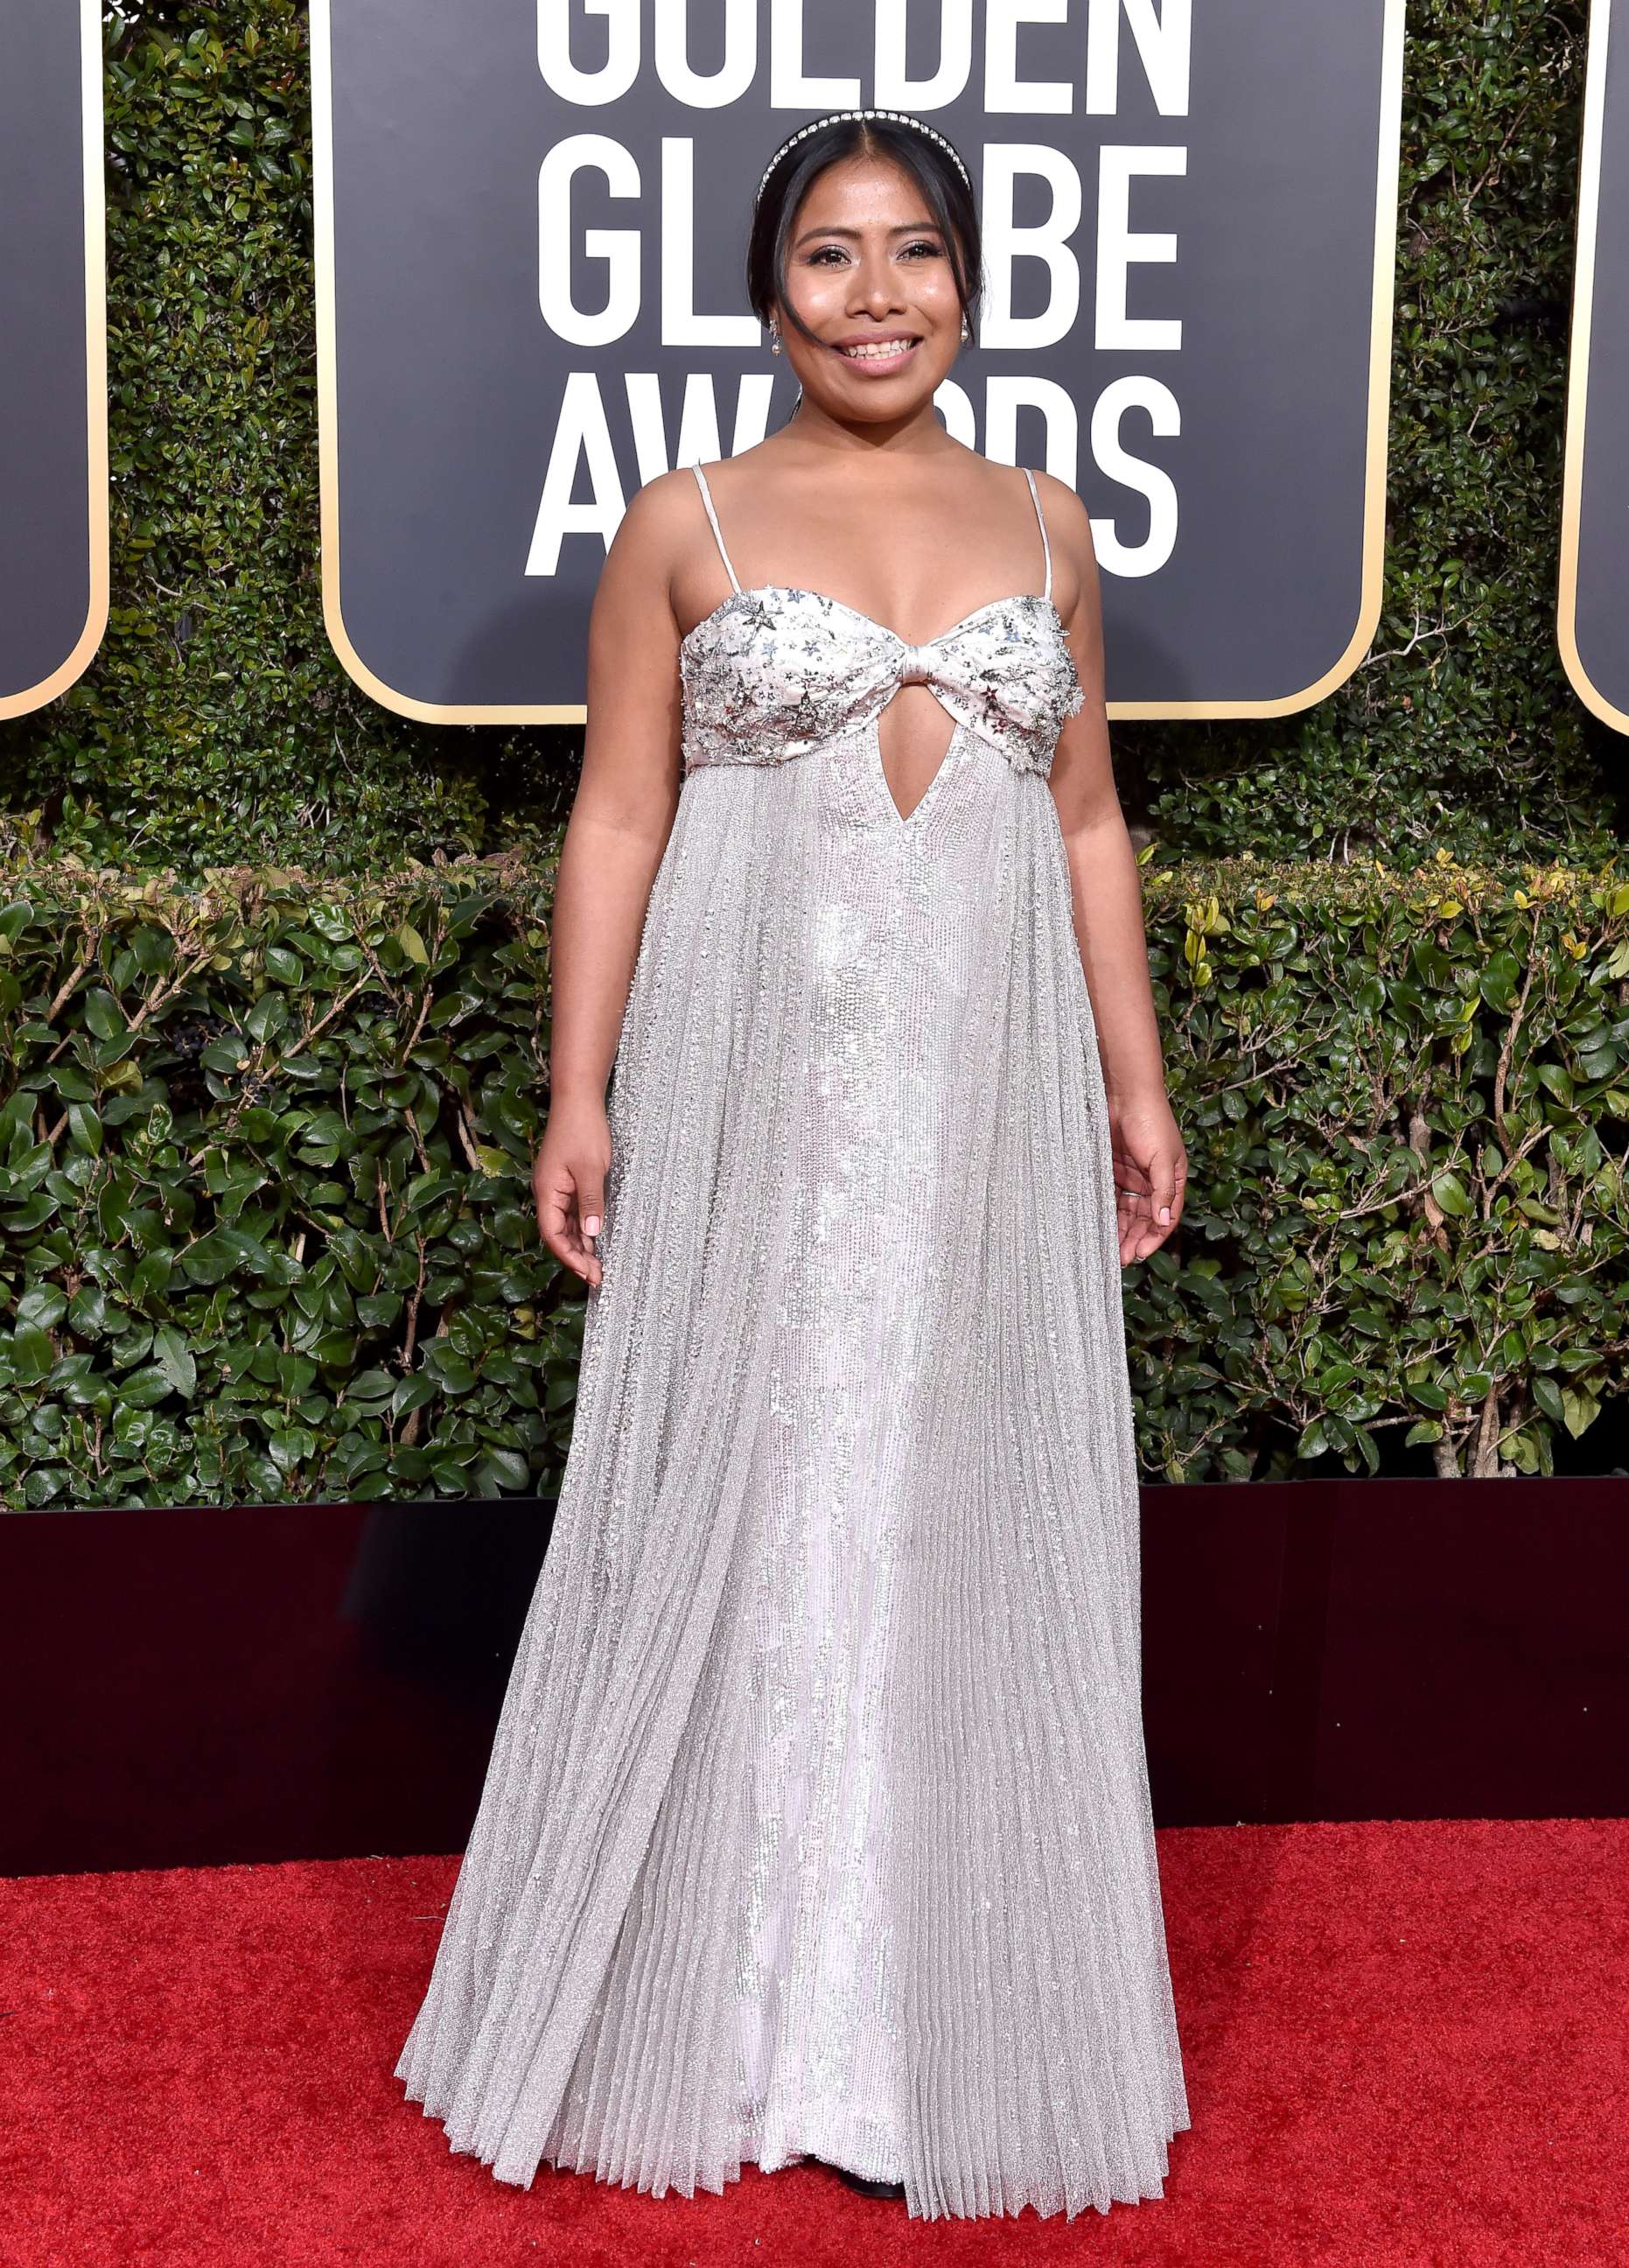 PHOTO: Yalitza Aparicio attends the 76th annual Golden Globe awards at the Beverly Hilton Hotel, Jan. 6, 2019, in Beverly Hills, Calif.